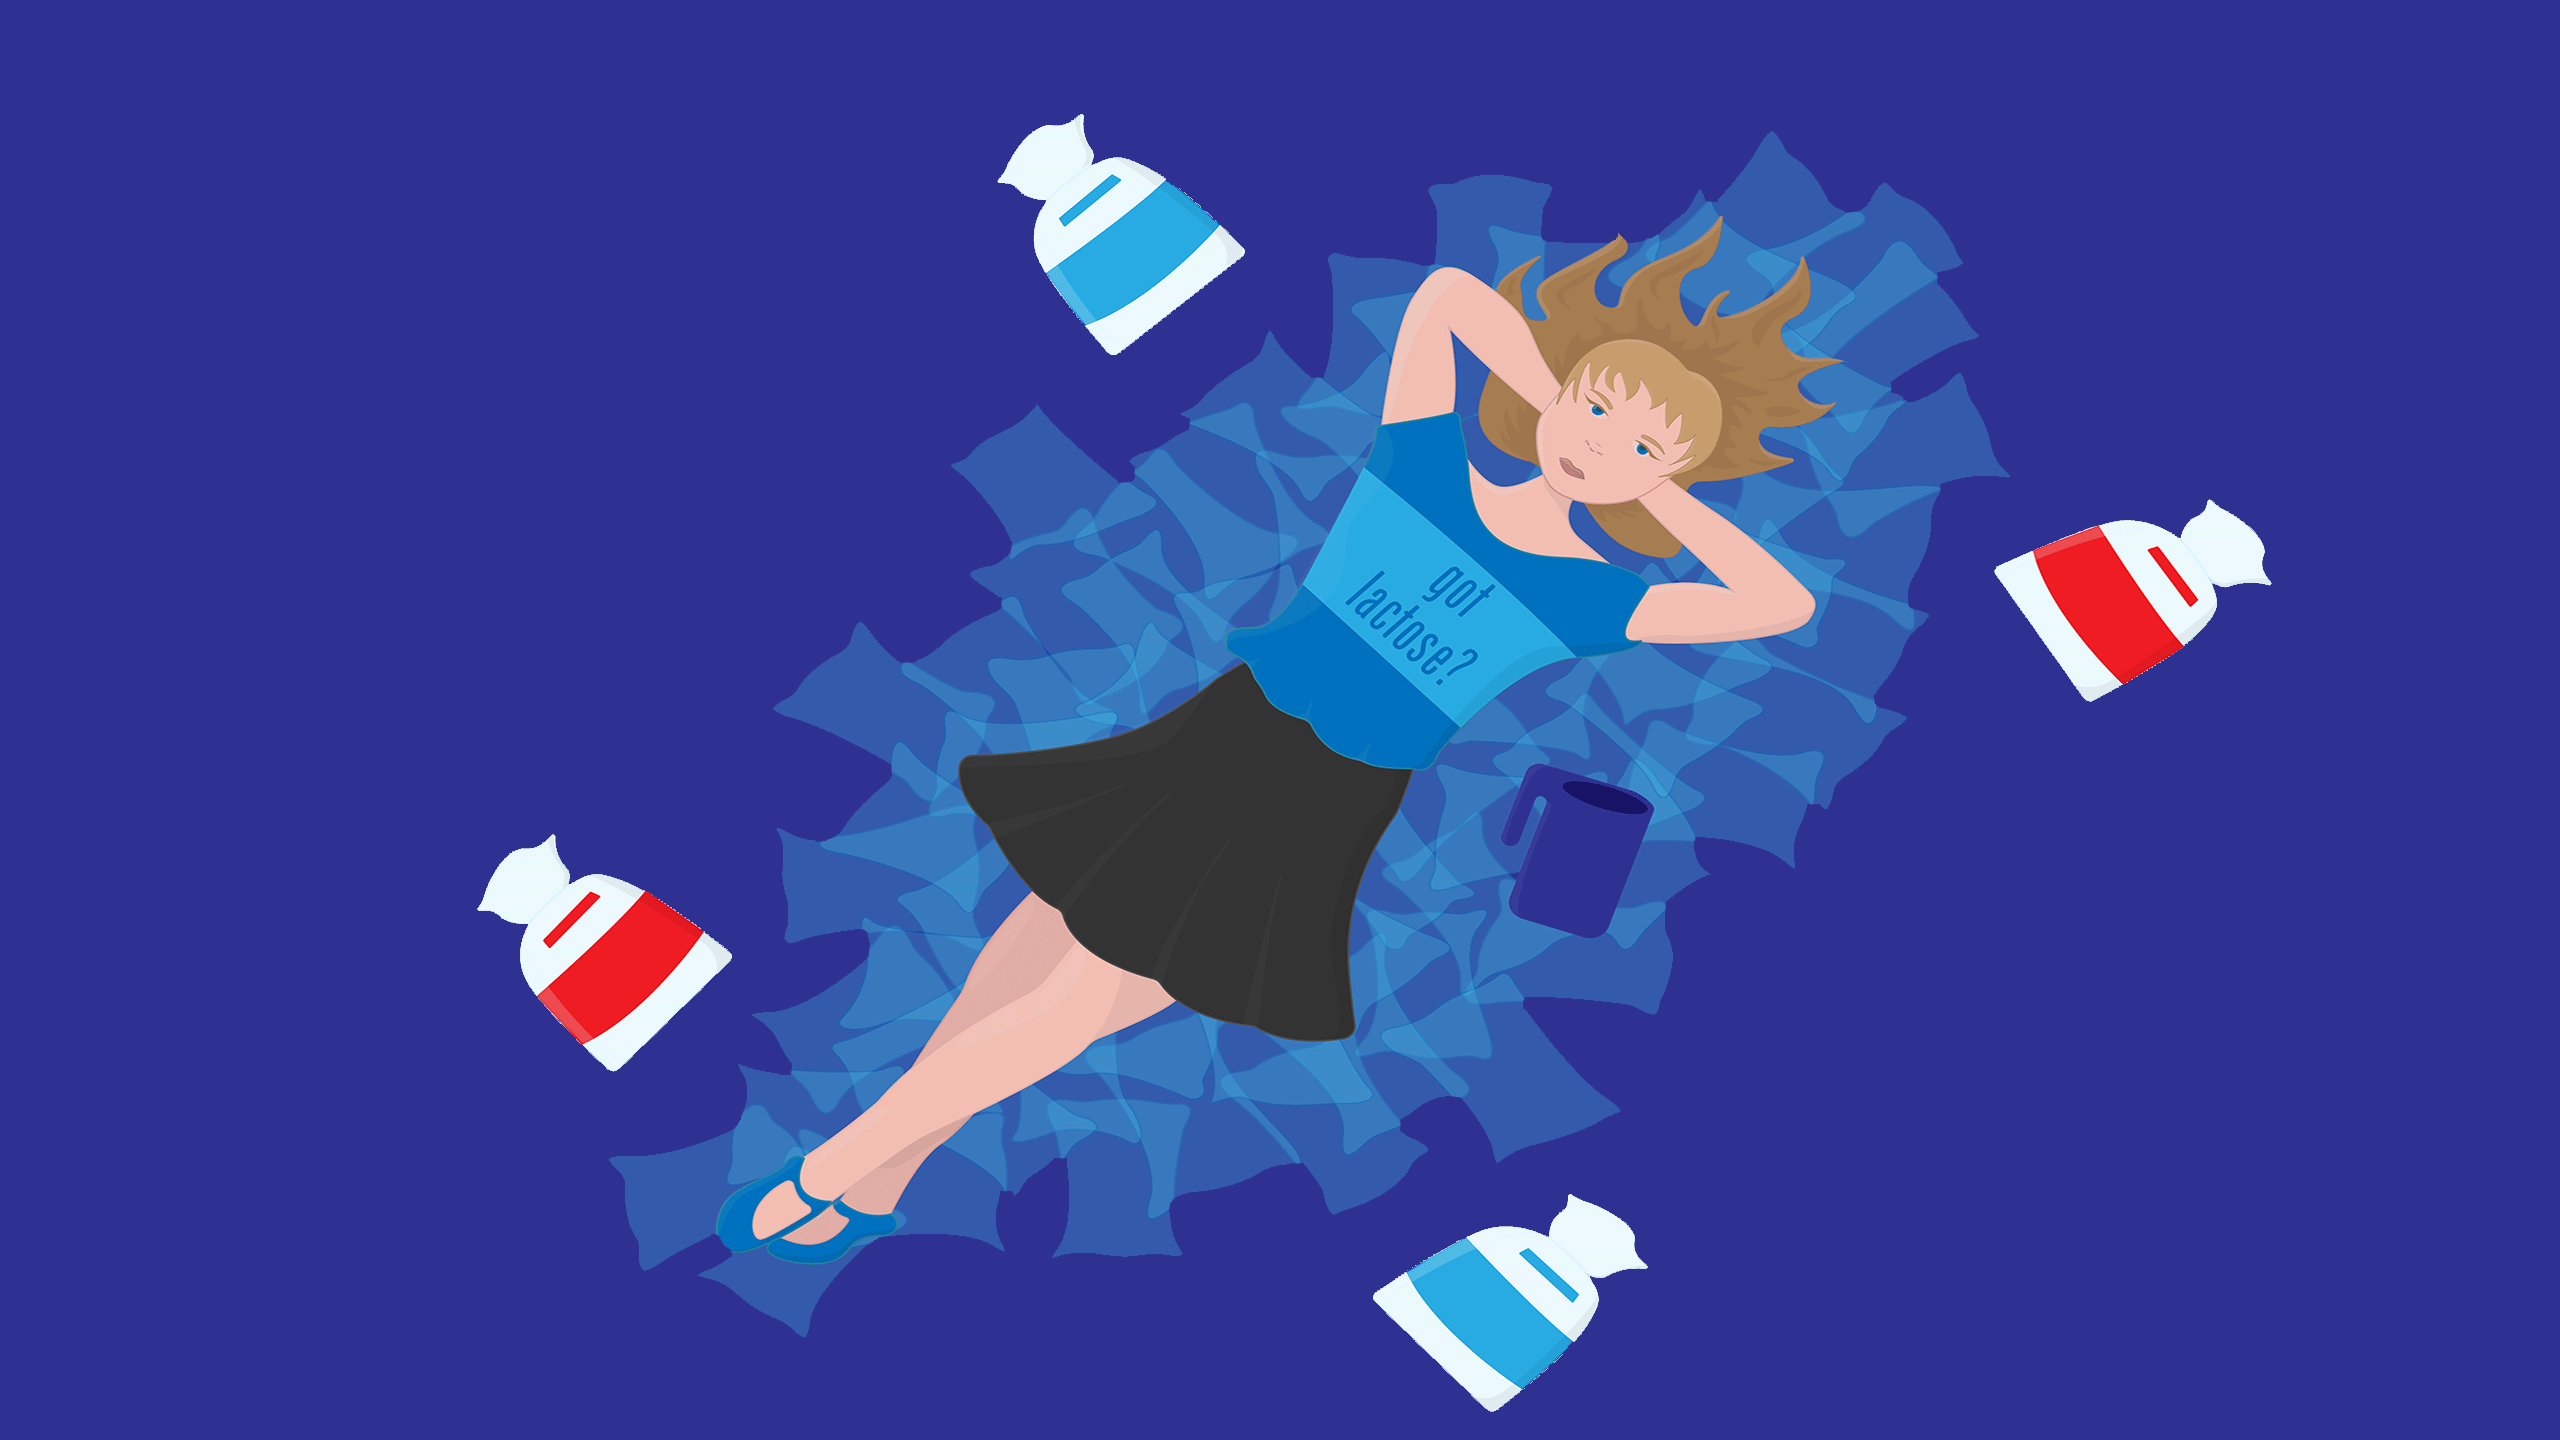 A student lying in a big pile of milk bags,